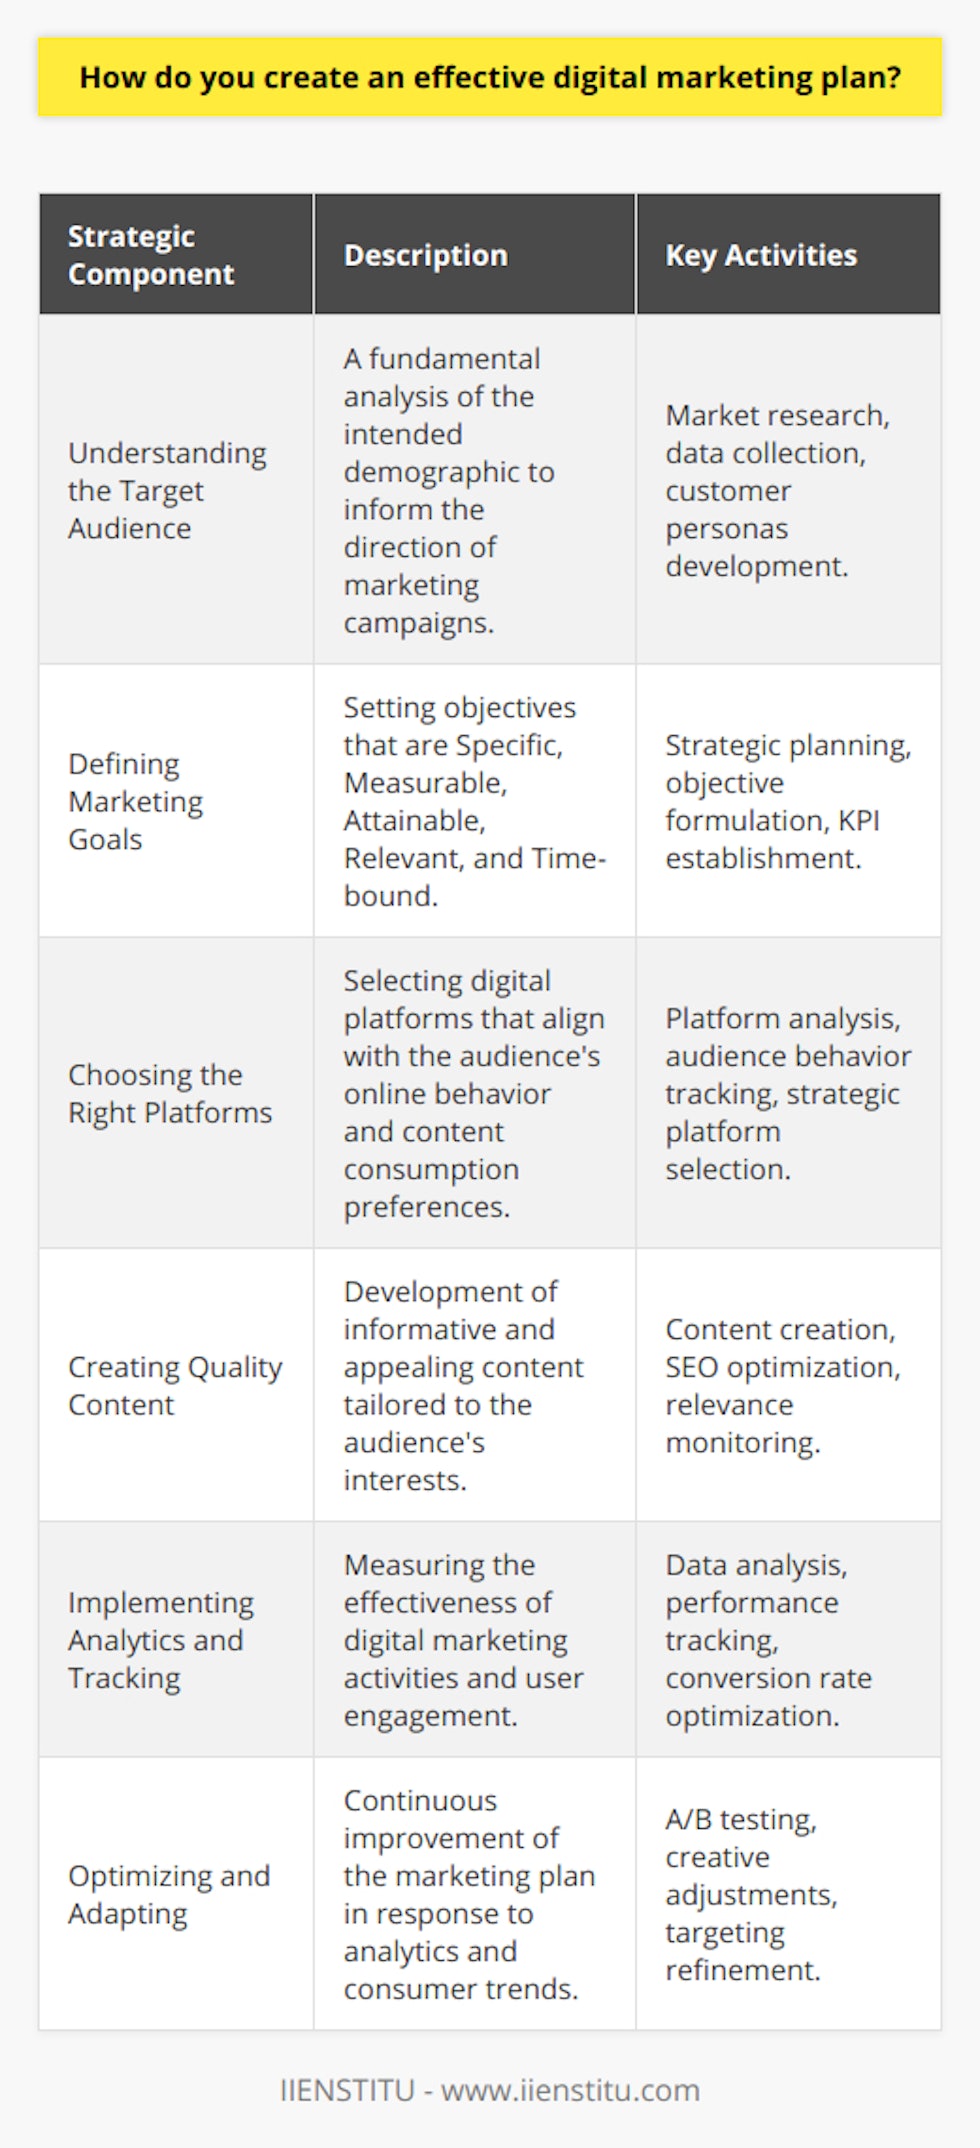 Creating an effective digital marketing plan involves precise strategic steps that resonate strongly with the needs and behaviors of a specific audience and the overall goals of a brand or company. Below is a guide to formulating such a plan.Understanding the Target AudienceThe cornerstone of an effective digital marketing plan is a deep understanding of the target audience. Sophisticated market research is paramount, encompassing the collection and analysis of data on customer demographics, behavioral patterns, and consumption habits. Such insights shape the creation of customer personas, enabling marketers to conceptualize campaigns that speak directly to the interests and needs of their audience.Defining Marketing GoalsStrategic goal setting is a pivotal stage in a digital marketing plan. Employing the SMART criteria—specific, measurable, attainable, relevant, and time-bound—leads to the formulation of objectives that provide strategic direction and indicators of success. These detailed and quantifiable goals guarantee that all marketing efforts are aligning with a company’s aspirations, thereby facilitating focused efforts and resource allocation.Choosing the Right PlatformsDigital marketing spans a universe of platforms, each offering unique advantages and audience reach. The selection of platforms should integrate seamlessly with the identified preferences and online behaviors of the target audience. Based on the target demographic's digital footprint, marketers can opt for a rich mix that may include social media channels, search engine marketing, email campaigns, and influential blogs or content hubs.Creating Quality ContentContent is the voice of digital marketing. A well-defined content strategy empowers brands to engage with audiences meaningfully. This entails developing content that possesses both substance and appeal—informative, timely, and reflective of the audience's language and interests. SEO techniques should also be employed to enhance visibility in search engine rankings, bridging the gap between content and its intended readership.Implementing Analytics and TrackingUnderstanding the impact of digital marketing activities hinges on the use of analytics and performance tracking. These tools offer quantifiable insights into the effectiveness of each aspect of a marketing plan, ranging from user engagement to conversion rates. Data yielded from analytics drives strategic decisions, directing marketers to invest more heavily in high-performing tactics or to recalibrate those that fall short.Optimizing and AdaptingThe digital landscape is dynamic, characterized by its constant evolution. As such, an effective marketing plan needs to be inherently flexible, ready to incorporate new insights and shifts in consumer behavior. This may involve A/B testing to evaluate the performance of different campaign elements, adjusting creative elements, or refining targeting criteria. A culture of continuous improvement ensures relevancy and the sustained effectiveness of marketing initiatives.In the journey of championing innovation in education, IIENSTITU leads by example, providing a wealth of resources and programs that inspire and empower learners. Similarly, in creating a digital marketing plan, businesses must adapt a learner's mindset—always seeking to understand their audience better, optimally communicate with them, and remain agile in navigating the digital ecosystem.